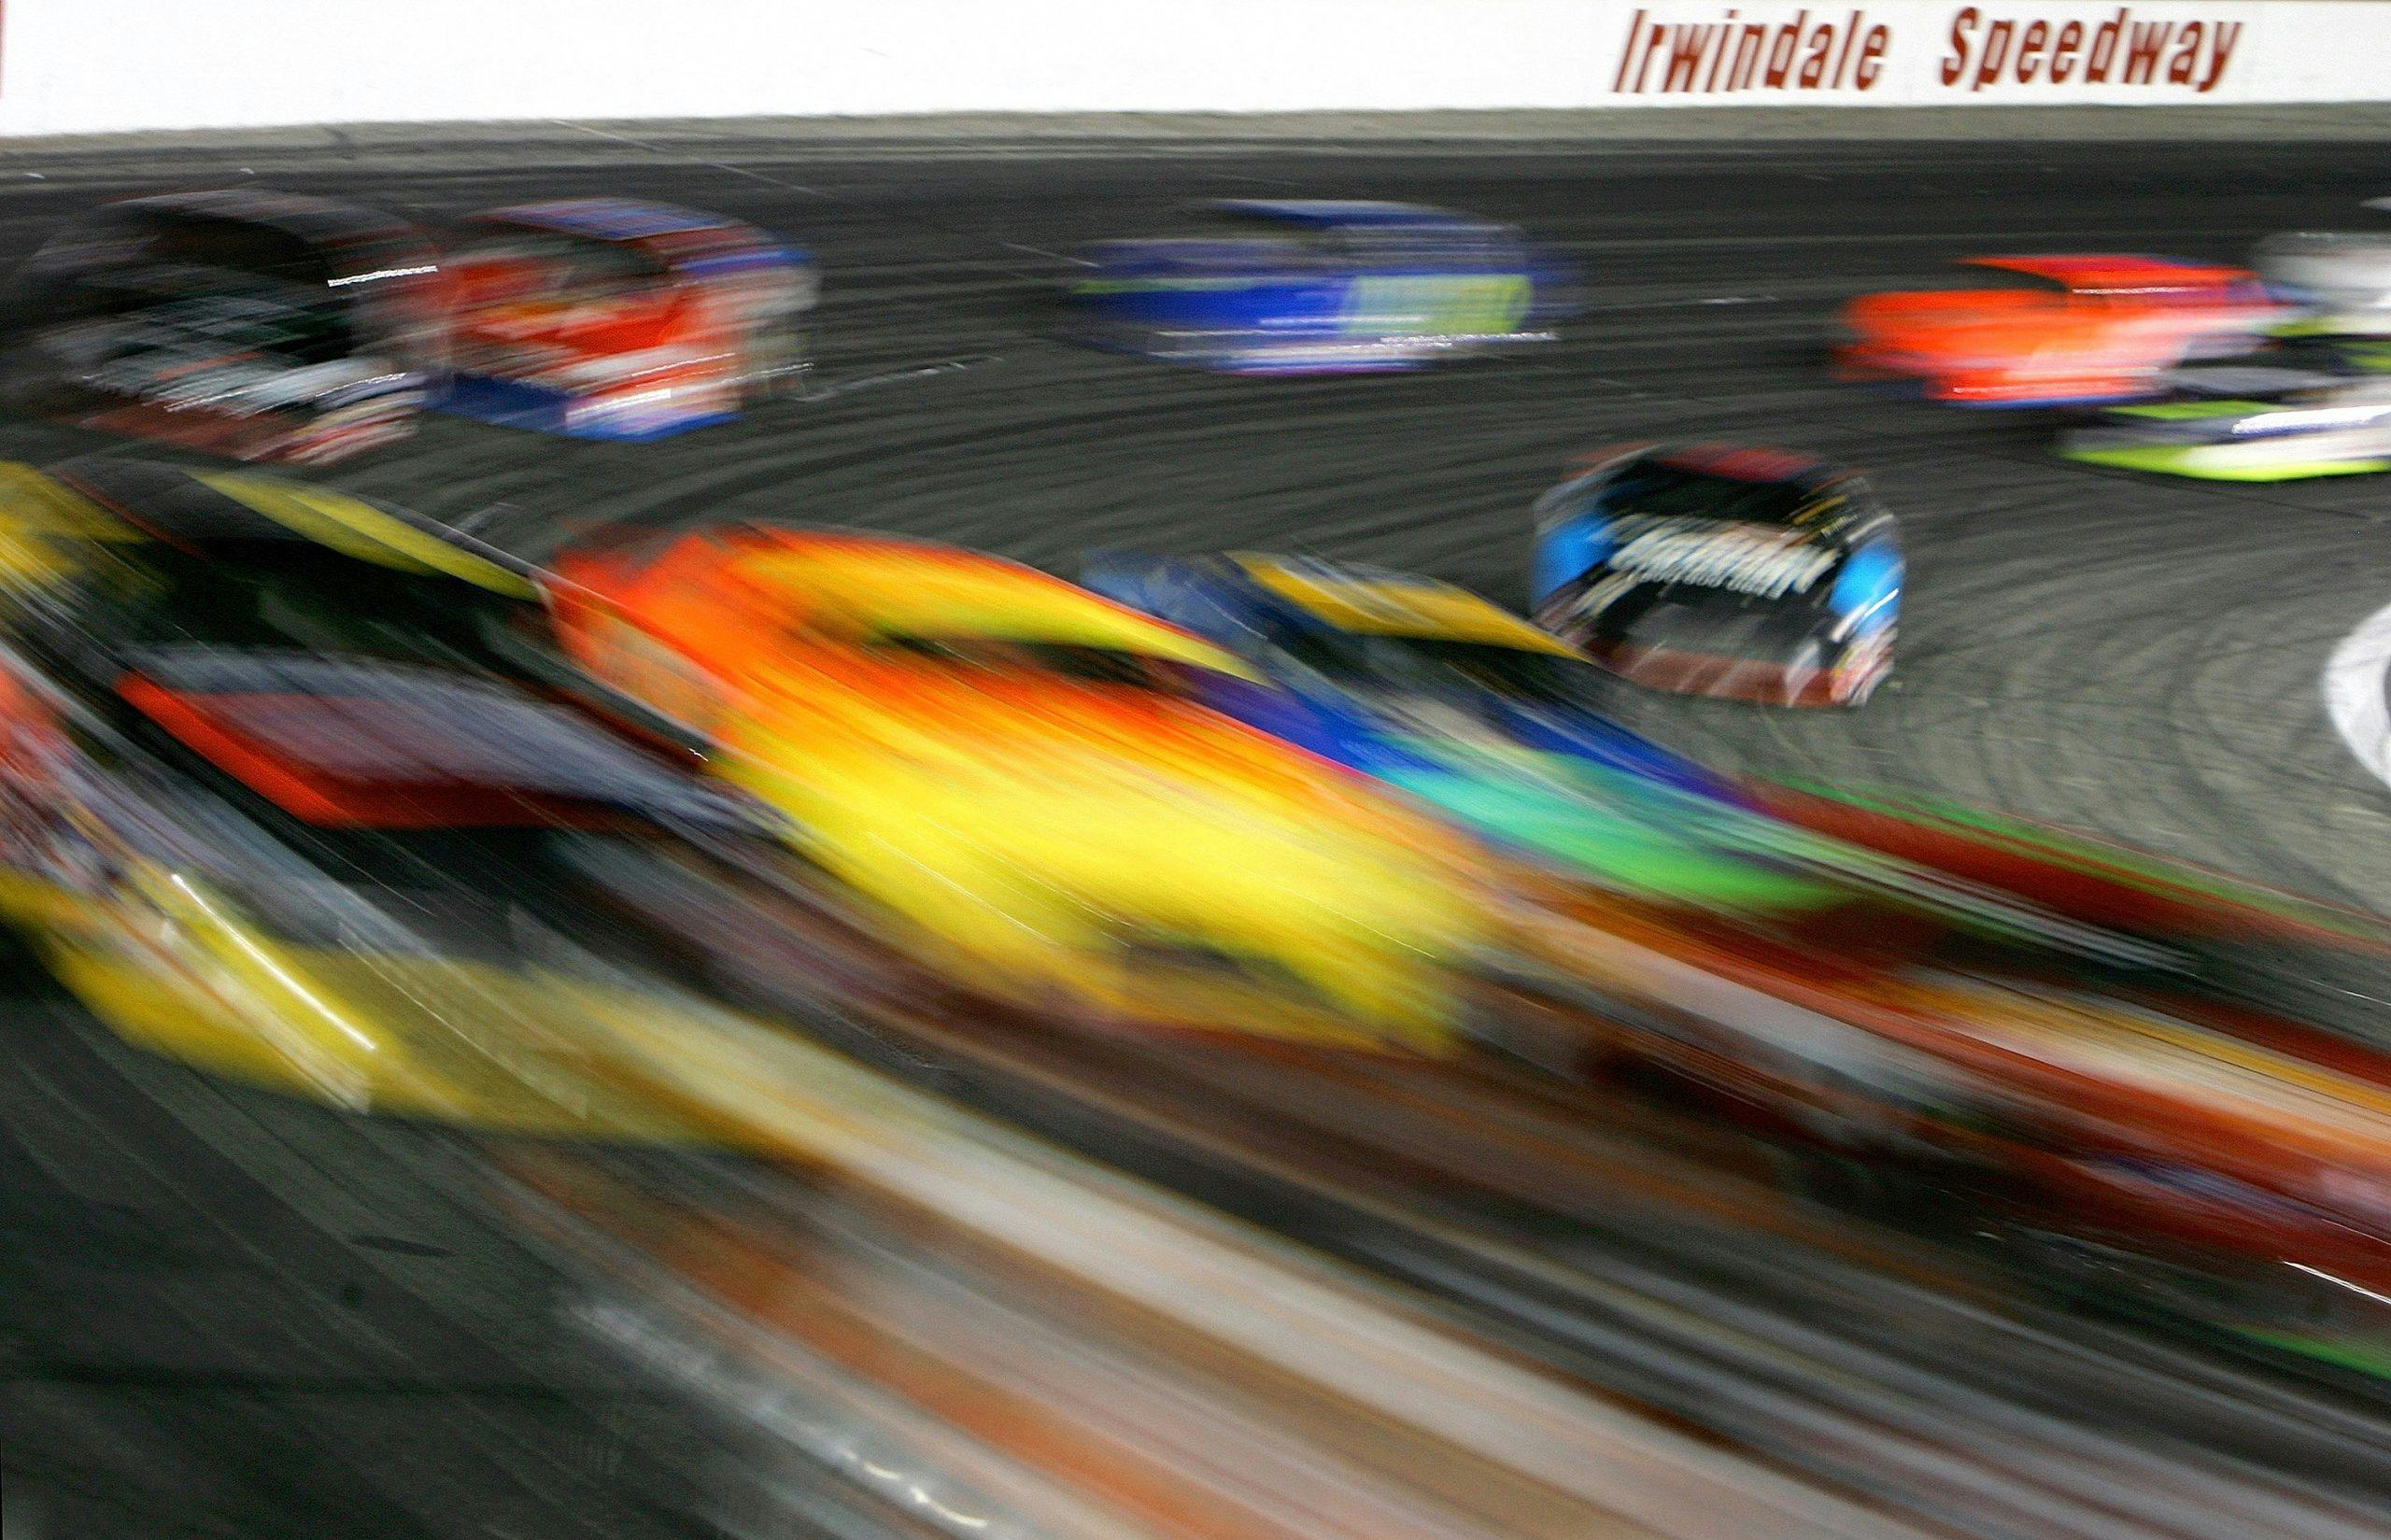 Donald Miralle/Getty Images for NASCAR